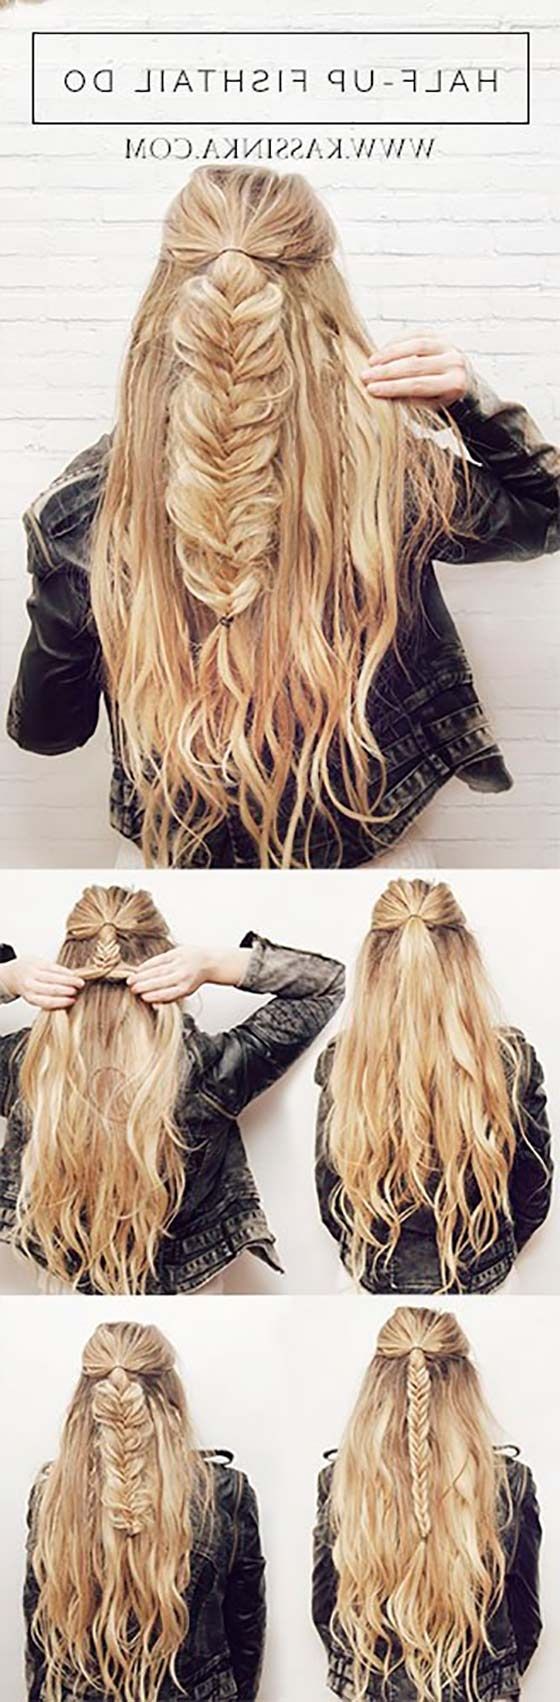 40 Braided Hairstyles For Long Hair Intended For Favorite Braided Layered Hairstyles (View 8 of 15)